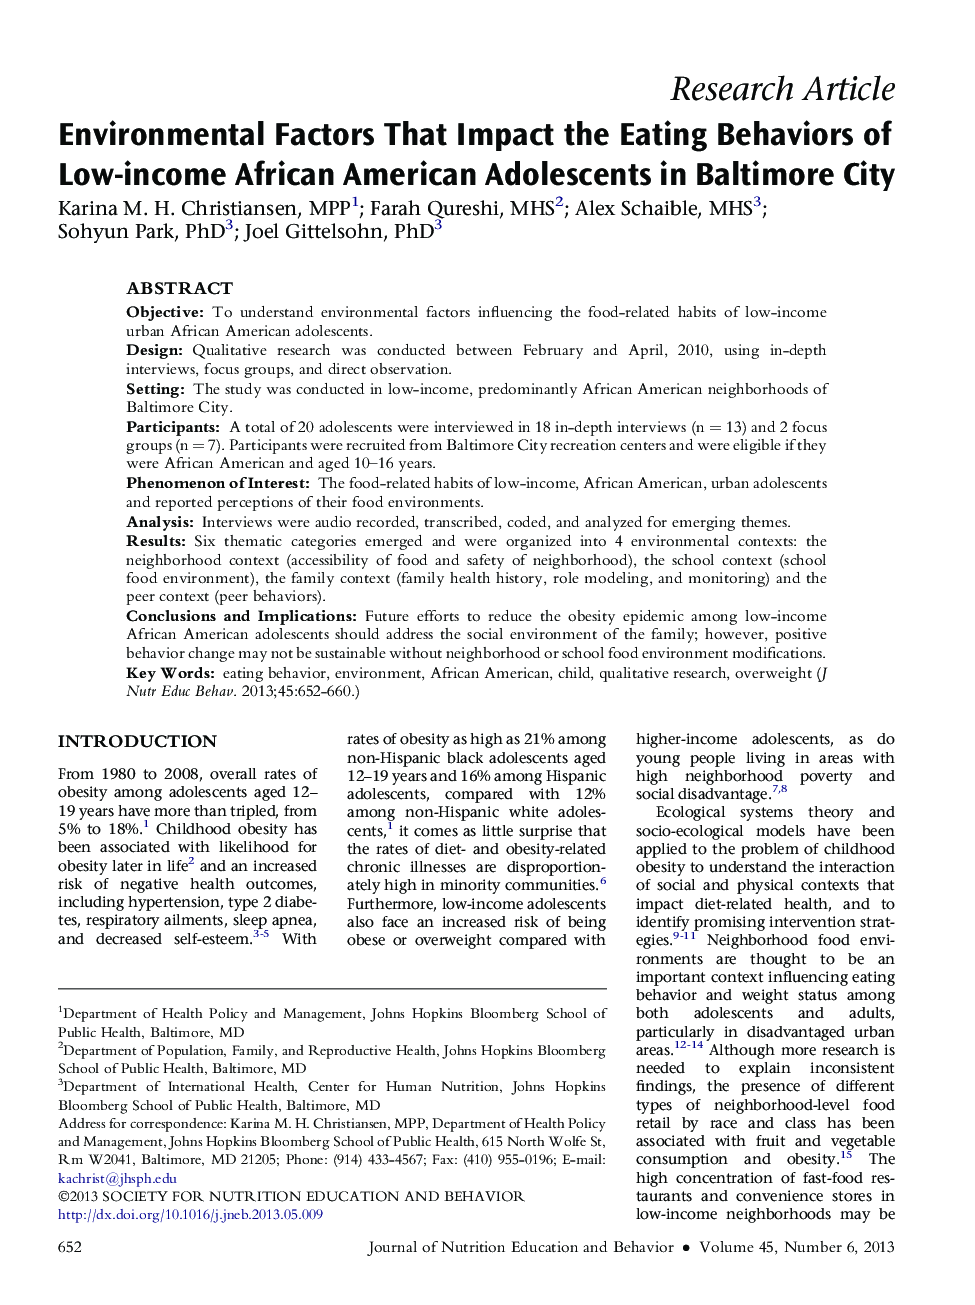 Environmental Factors That Impact the Eating Behaviors of Low-income African American Adolescents in Baltimore City